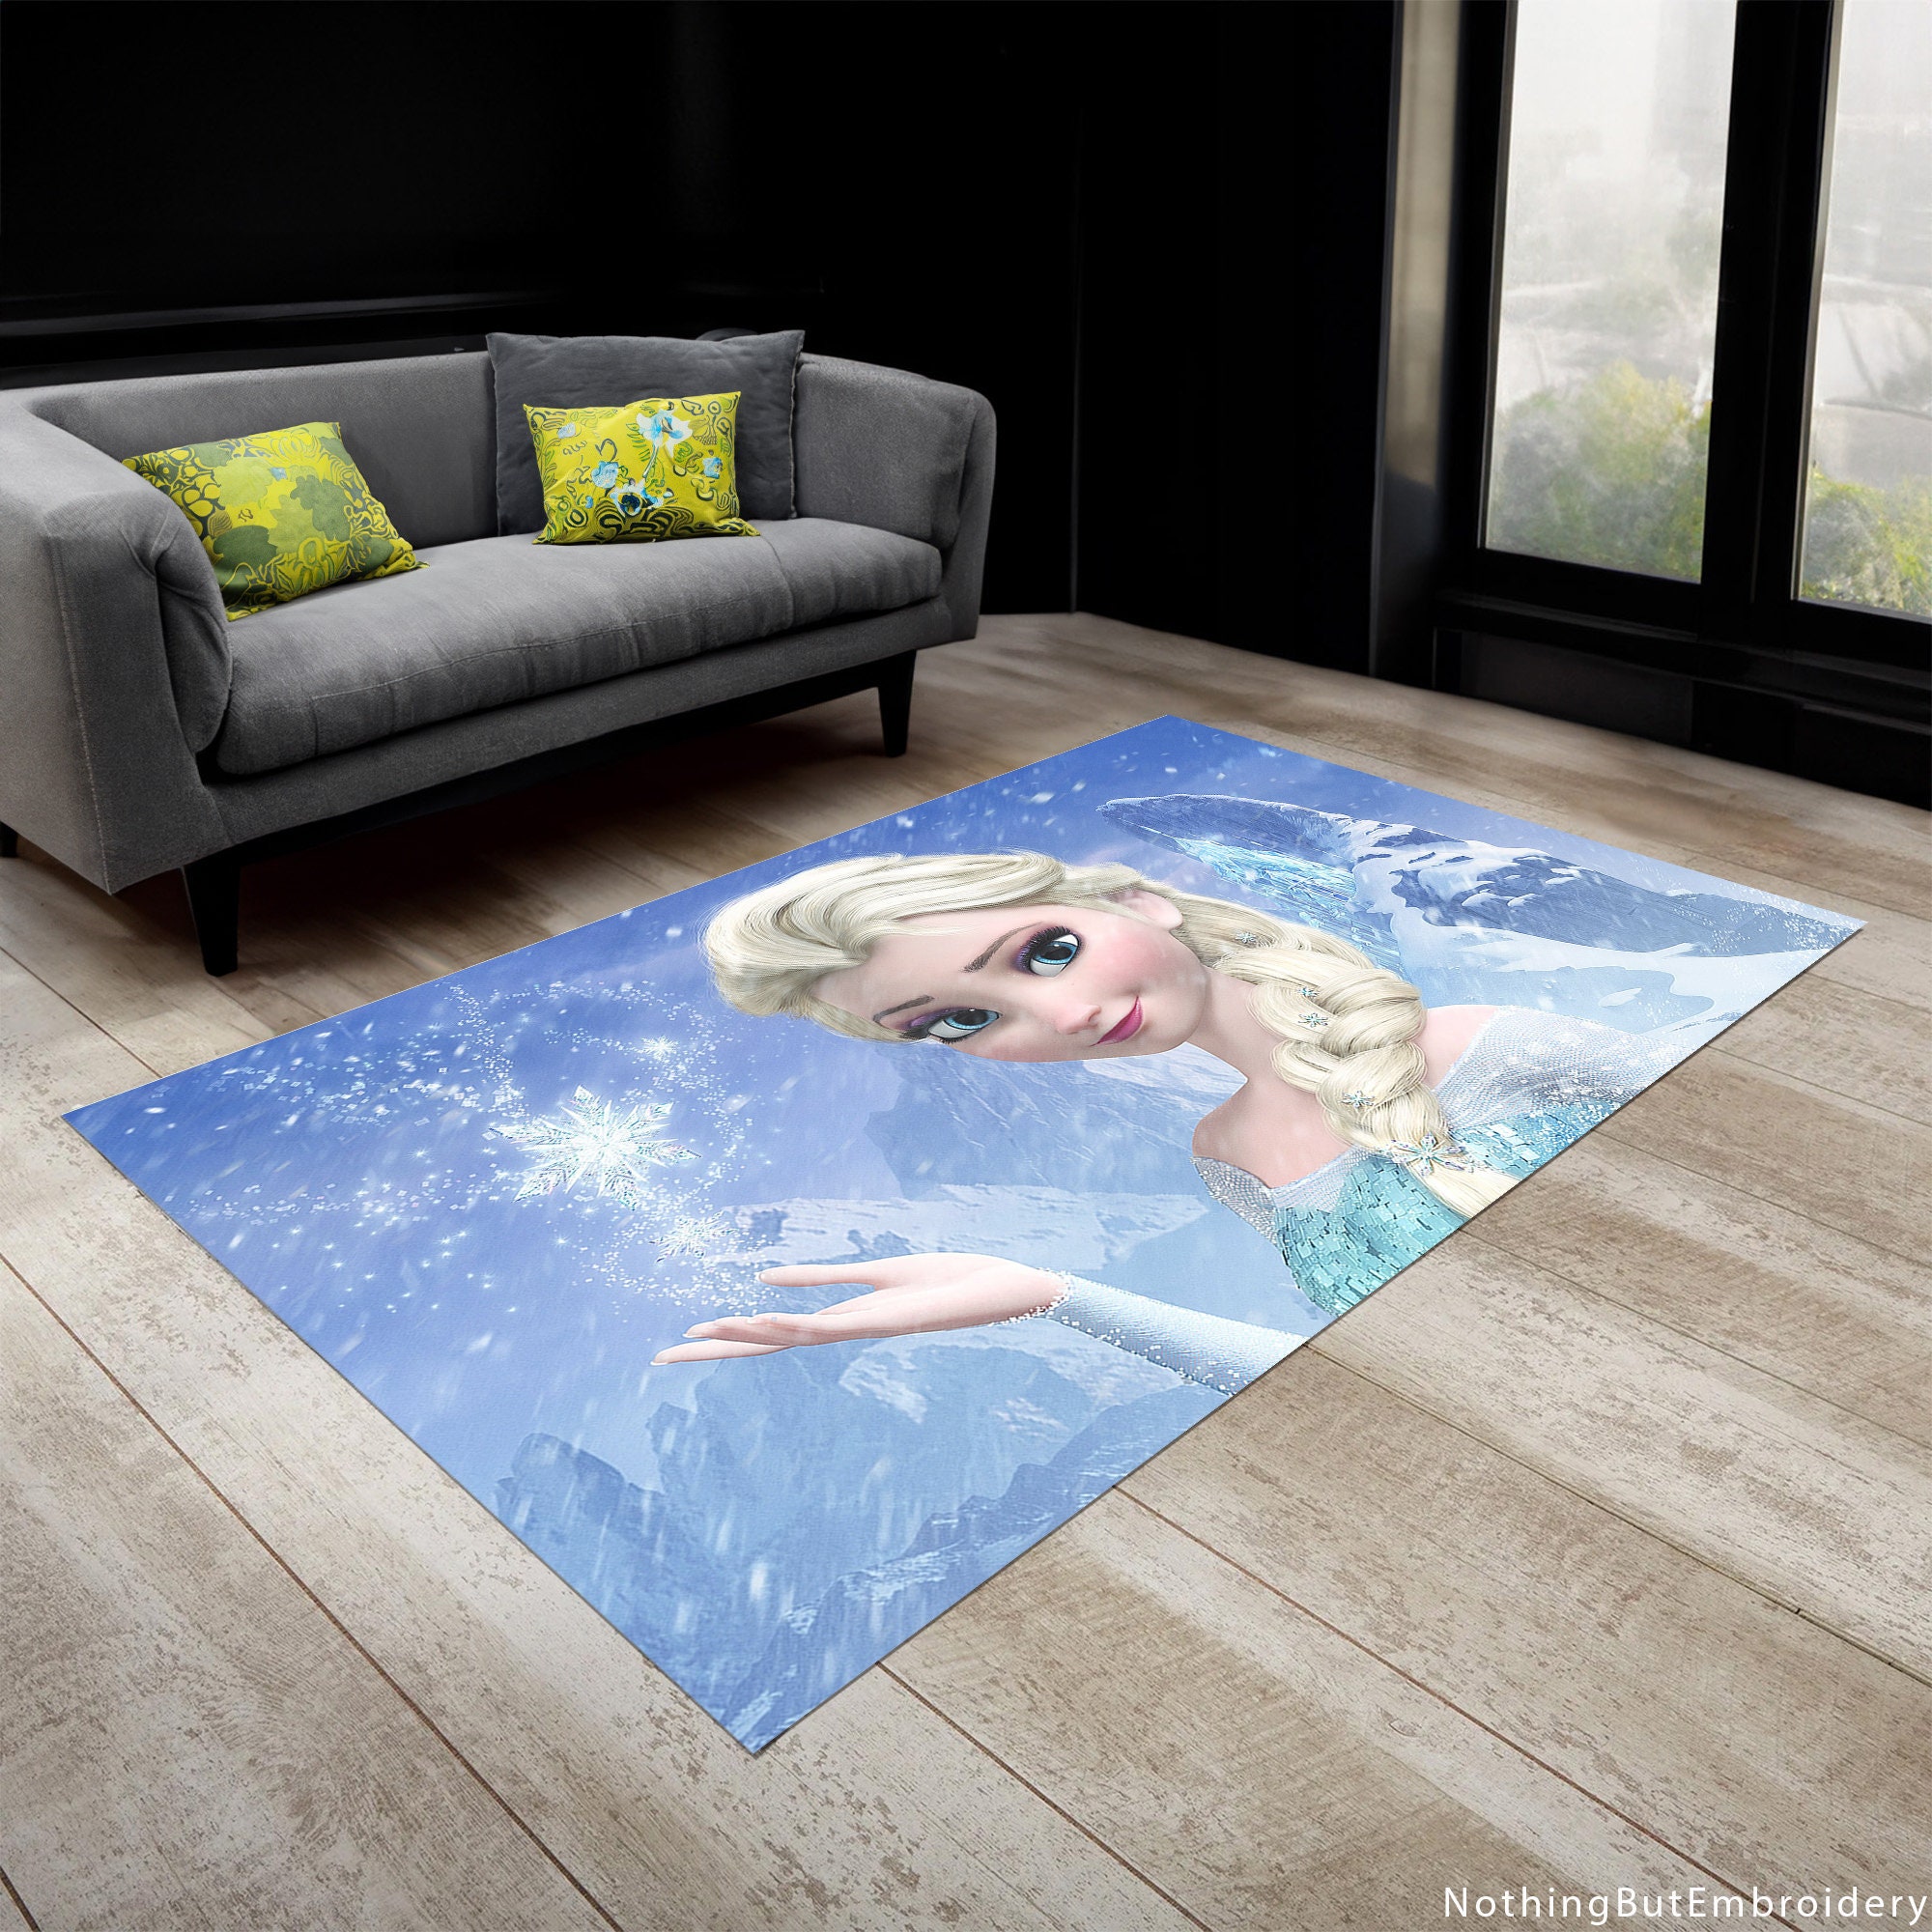 Discover Frozen Inspired Printed Rug, Blue Themed Rug, Princess Decor, Snowflake Pattern Kids Room Decor, Premium Quality, Perfect Gift for Children